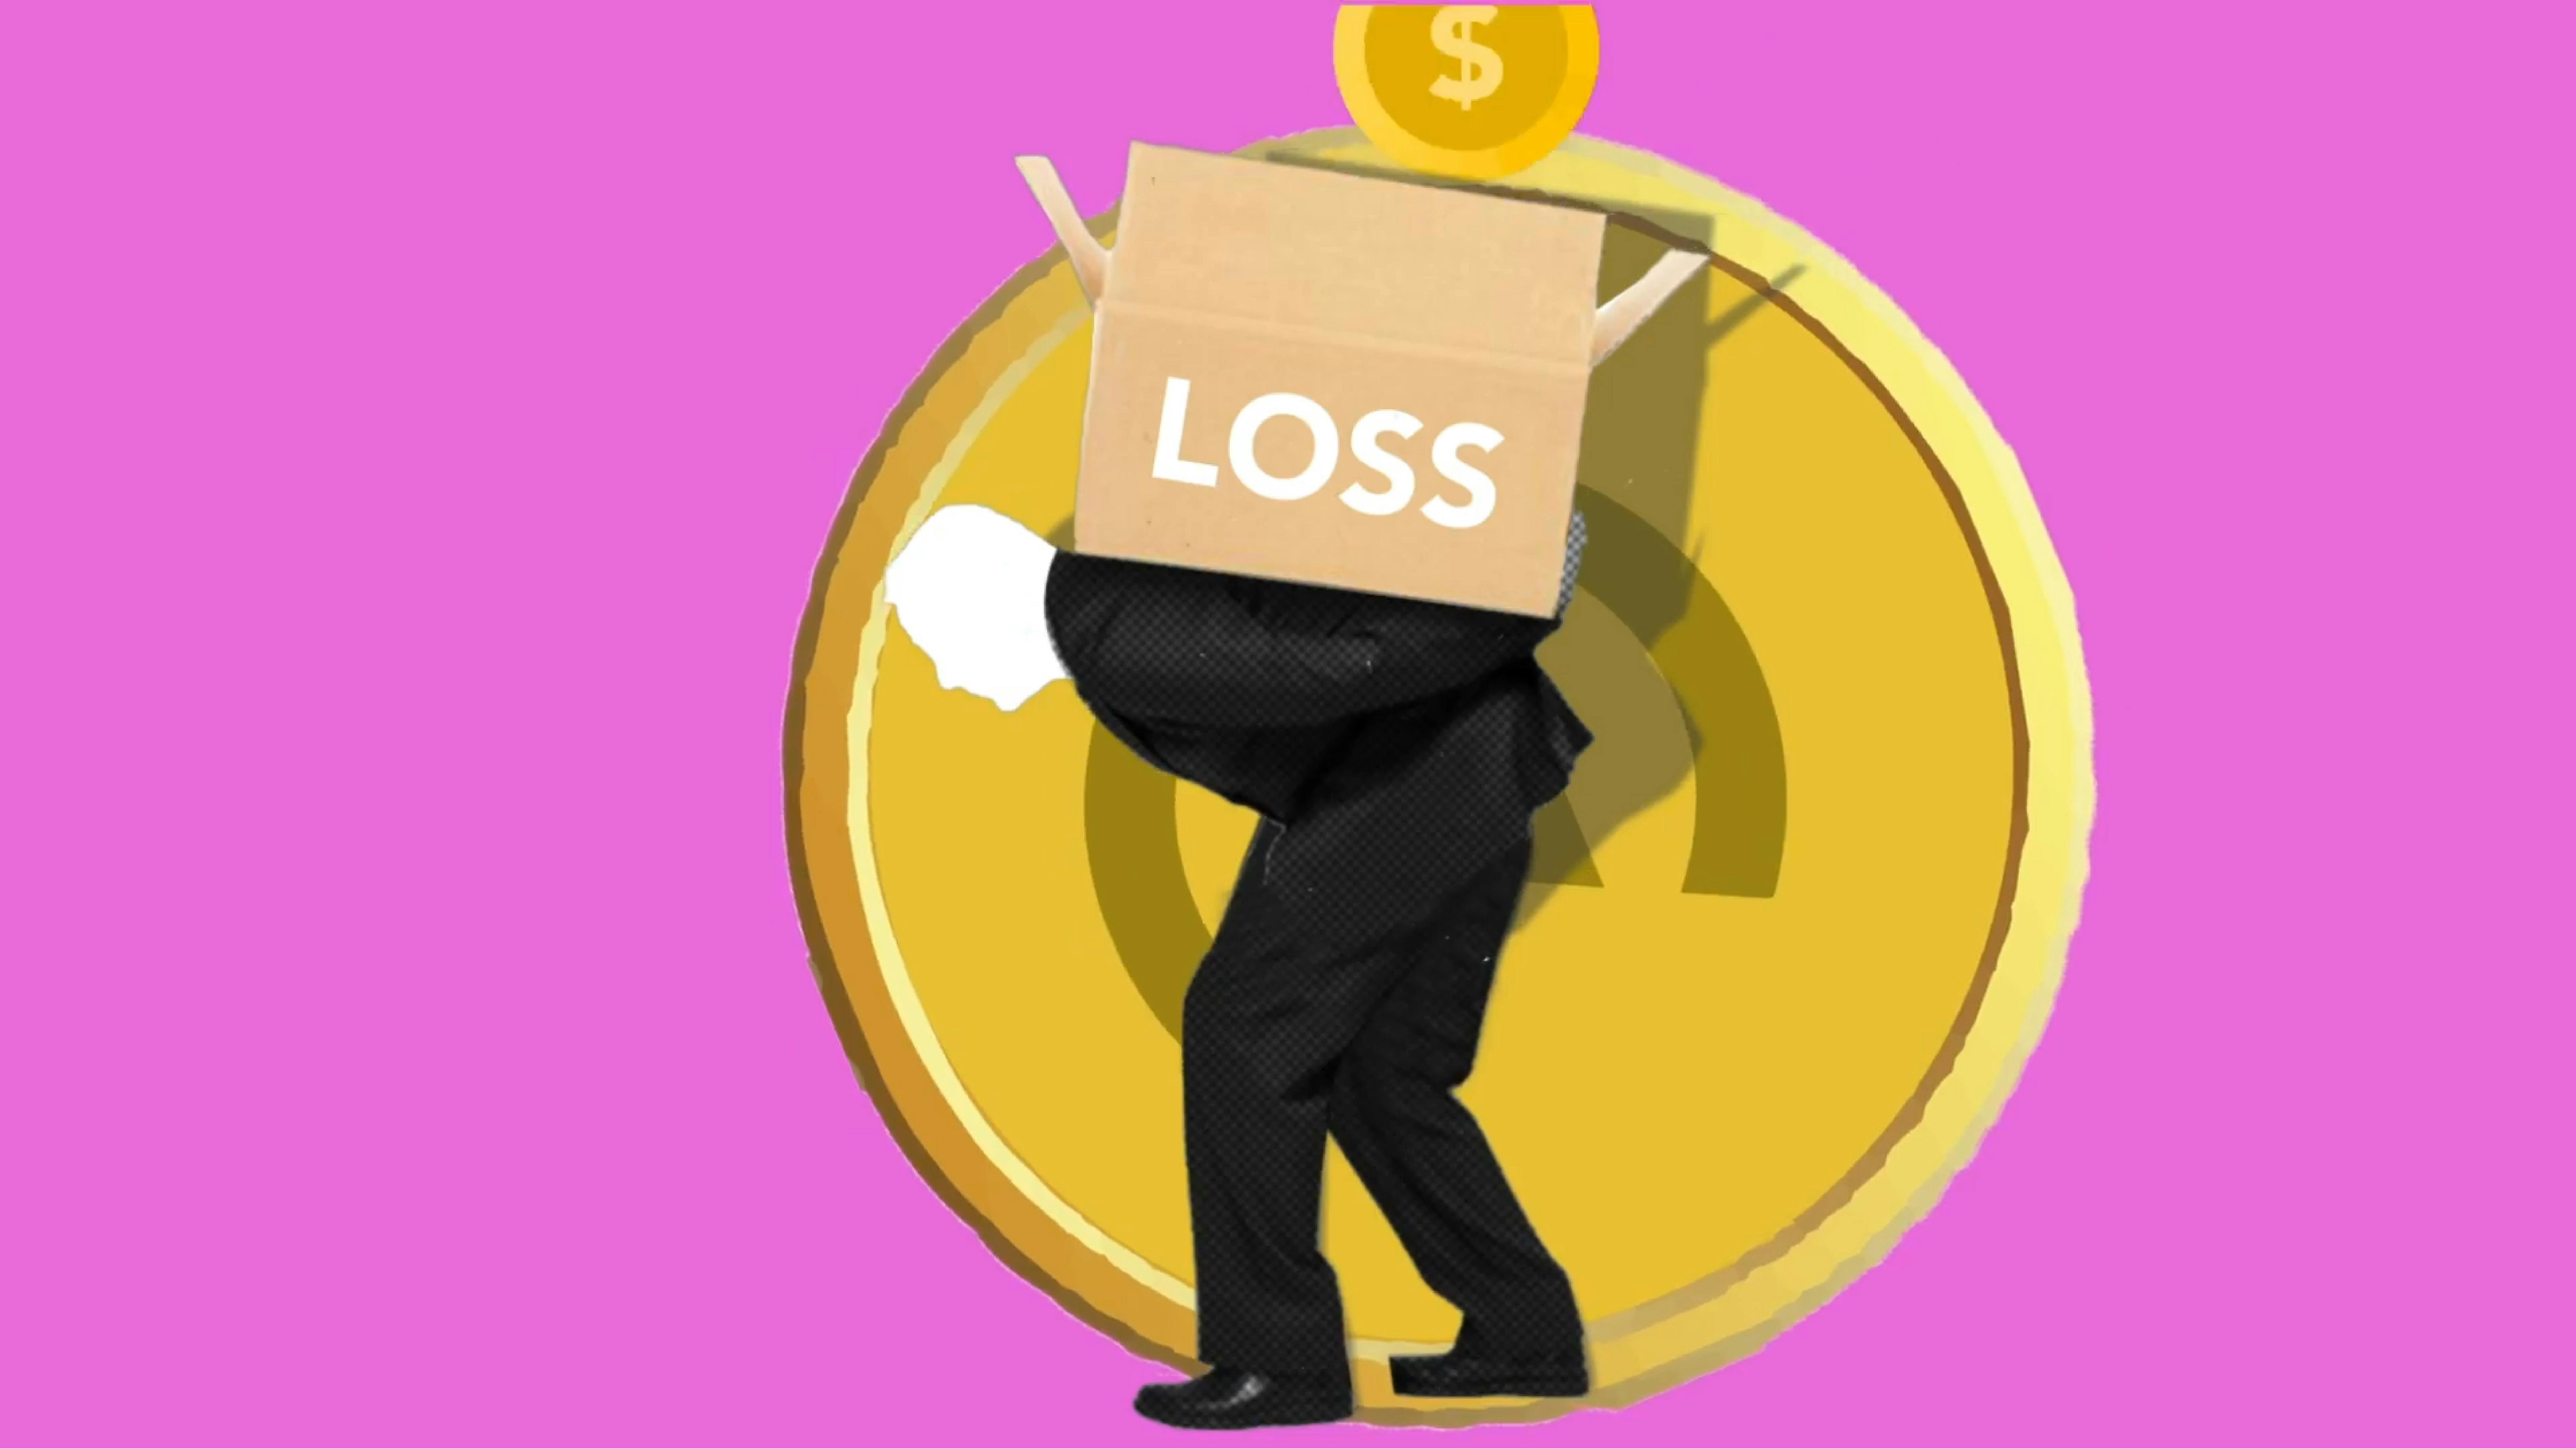 Free Illustration of man carrying box of financial loss on back Stock Photo